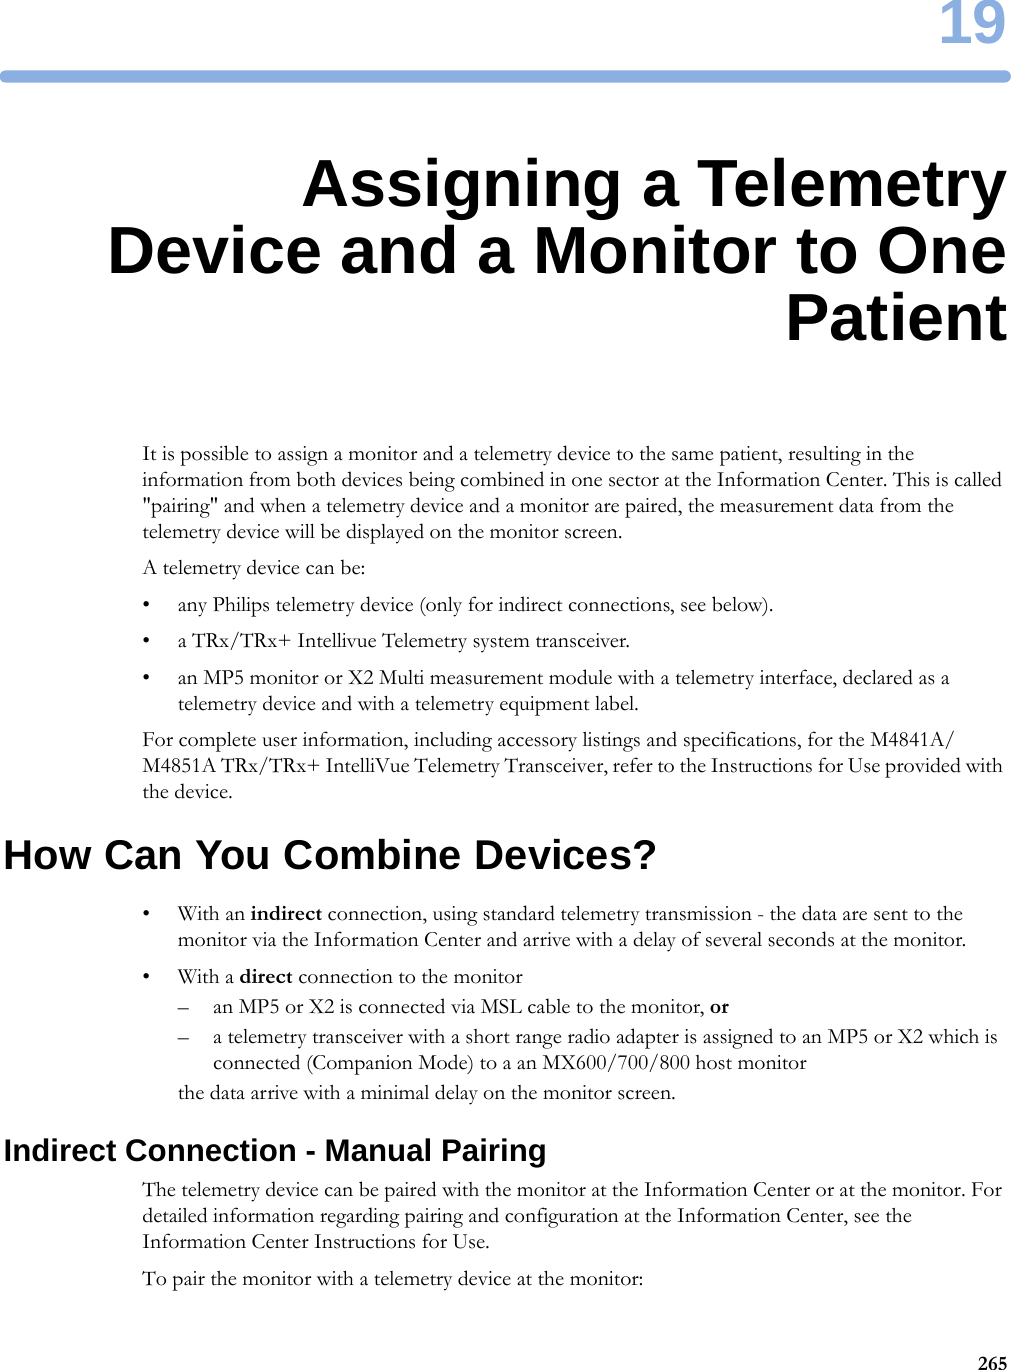 1926519Assigning a TelemetryDevice and a Monitor to OnePatientIt is possible to assign a monitor and a telemetry device to the same patient, resulting in the information from both devices being combined in one sector at the Information Center. This is called &quot;pairing&quot; and when a telemetry device and a monitor are paired, the measurement data from the telemetry device will be displayed on the monitor screen.A telemetry device can be:• any Philips telemetry device (only for indirect connections, see below).• a TRx/TRx+ Intellivue Telemetry system transceiver.• an MP5 monitor or X2 Multi measurement module with a telemetry interface, declared as a telemetry device and with a telemetry equipment label.For complete user information, including accessory listings and specifications, for the M4841A/M4851A TRx/TRx+ IntelliVue Telemetry Transceiver, refer to the Instructions for Use provided with the device.How Can You Combine Devices?•With an indirect connection, using standard telemetry transmission - the data are sent to the monitor via the Information Center and arrive with a delay of several seconds at the monitor.•With a direct connection to the monitor– an MP5 or X2 is connected via MSL cable to the monitor, or– a telemetry transceiver with a short range radio adapter is assigned to an MP5 or X2 which is connected (Companion Mode) to a an MX600/700/800 host monitorthe data arrive with a minimal delay on the monitor screen.Indirect Connection - Manual PairingThe telemetry device can be paired with the monitor at the Information Center or at the monitor. For detailed information regarding pairing and configuration at the Information Center, see the Information Center Instructions for Use.To pair the monitor with a telemetry device at the monitor: